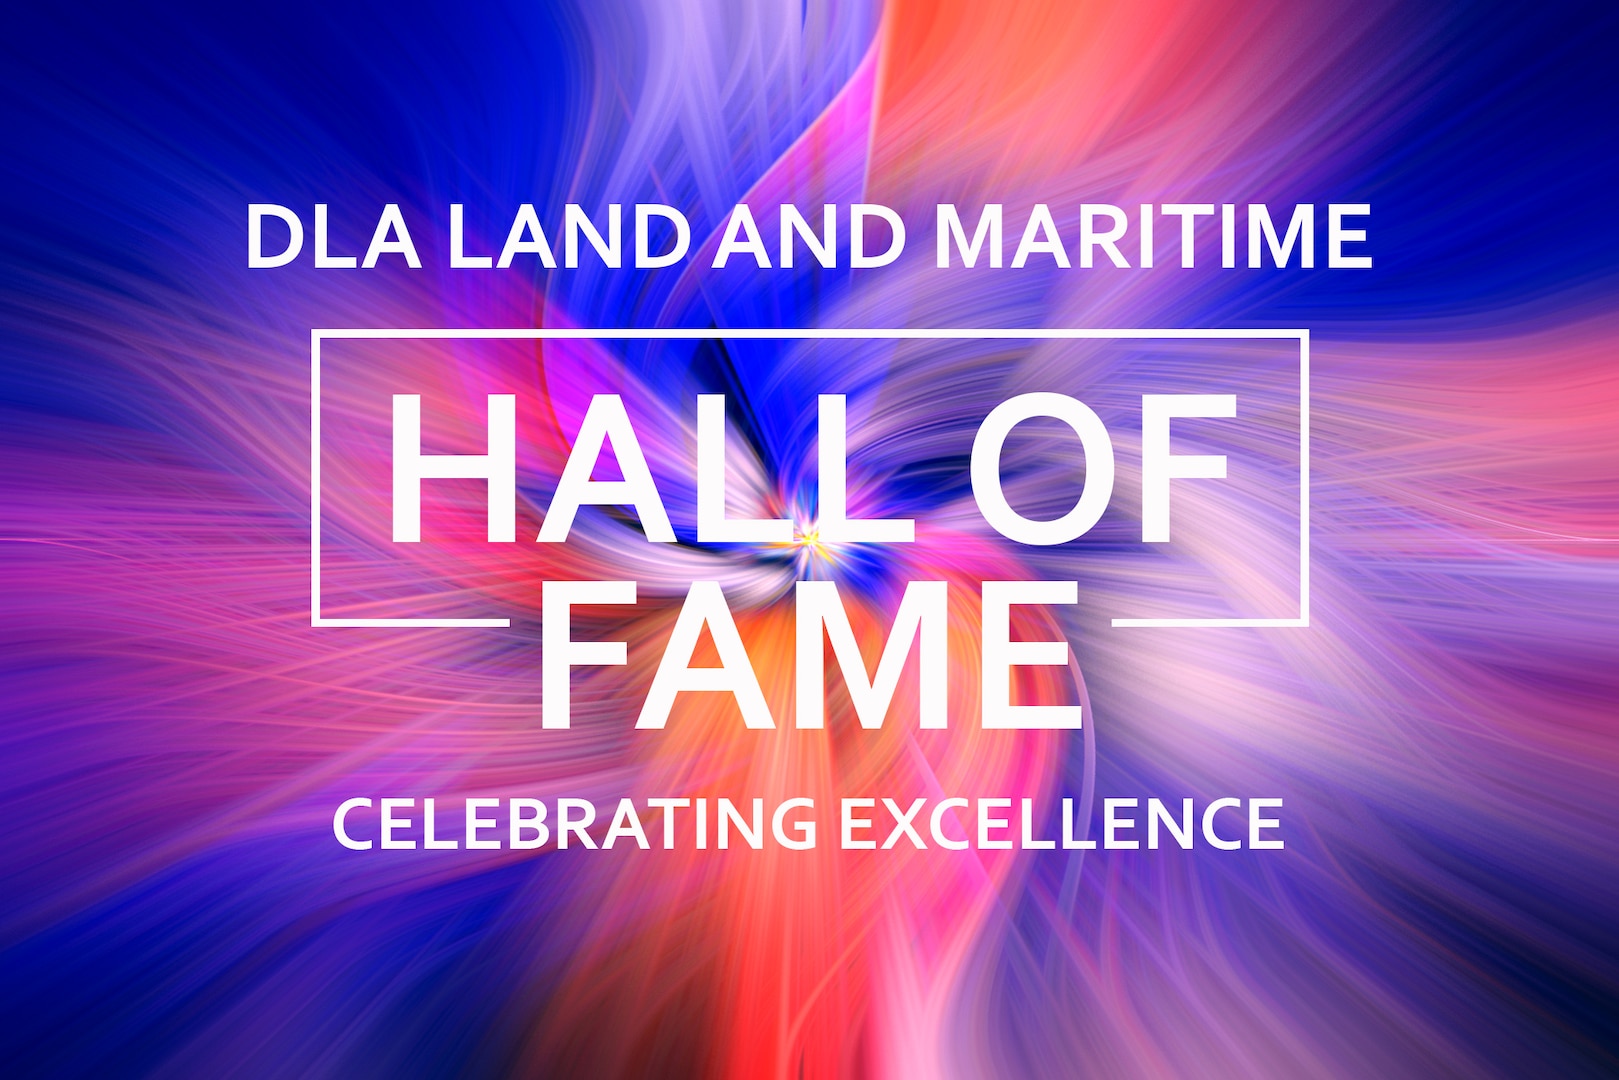 White text on a swirly background. 2022 DLA Land and Maritime Hall of Fame.